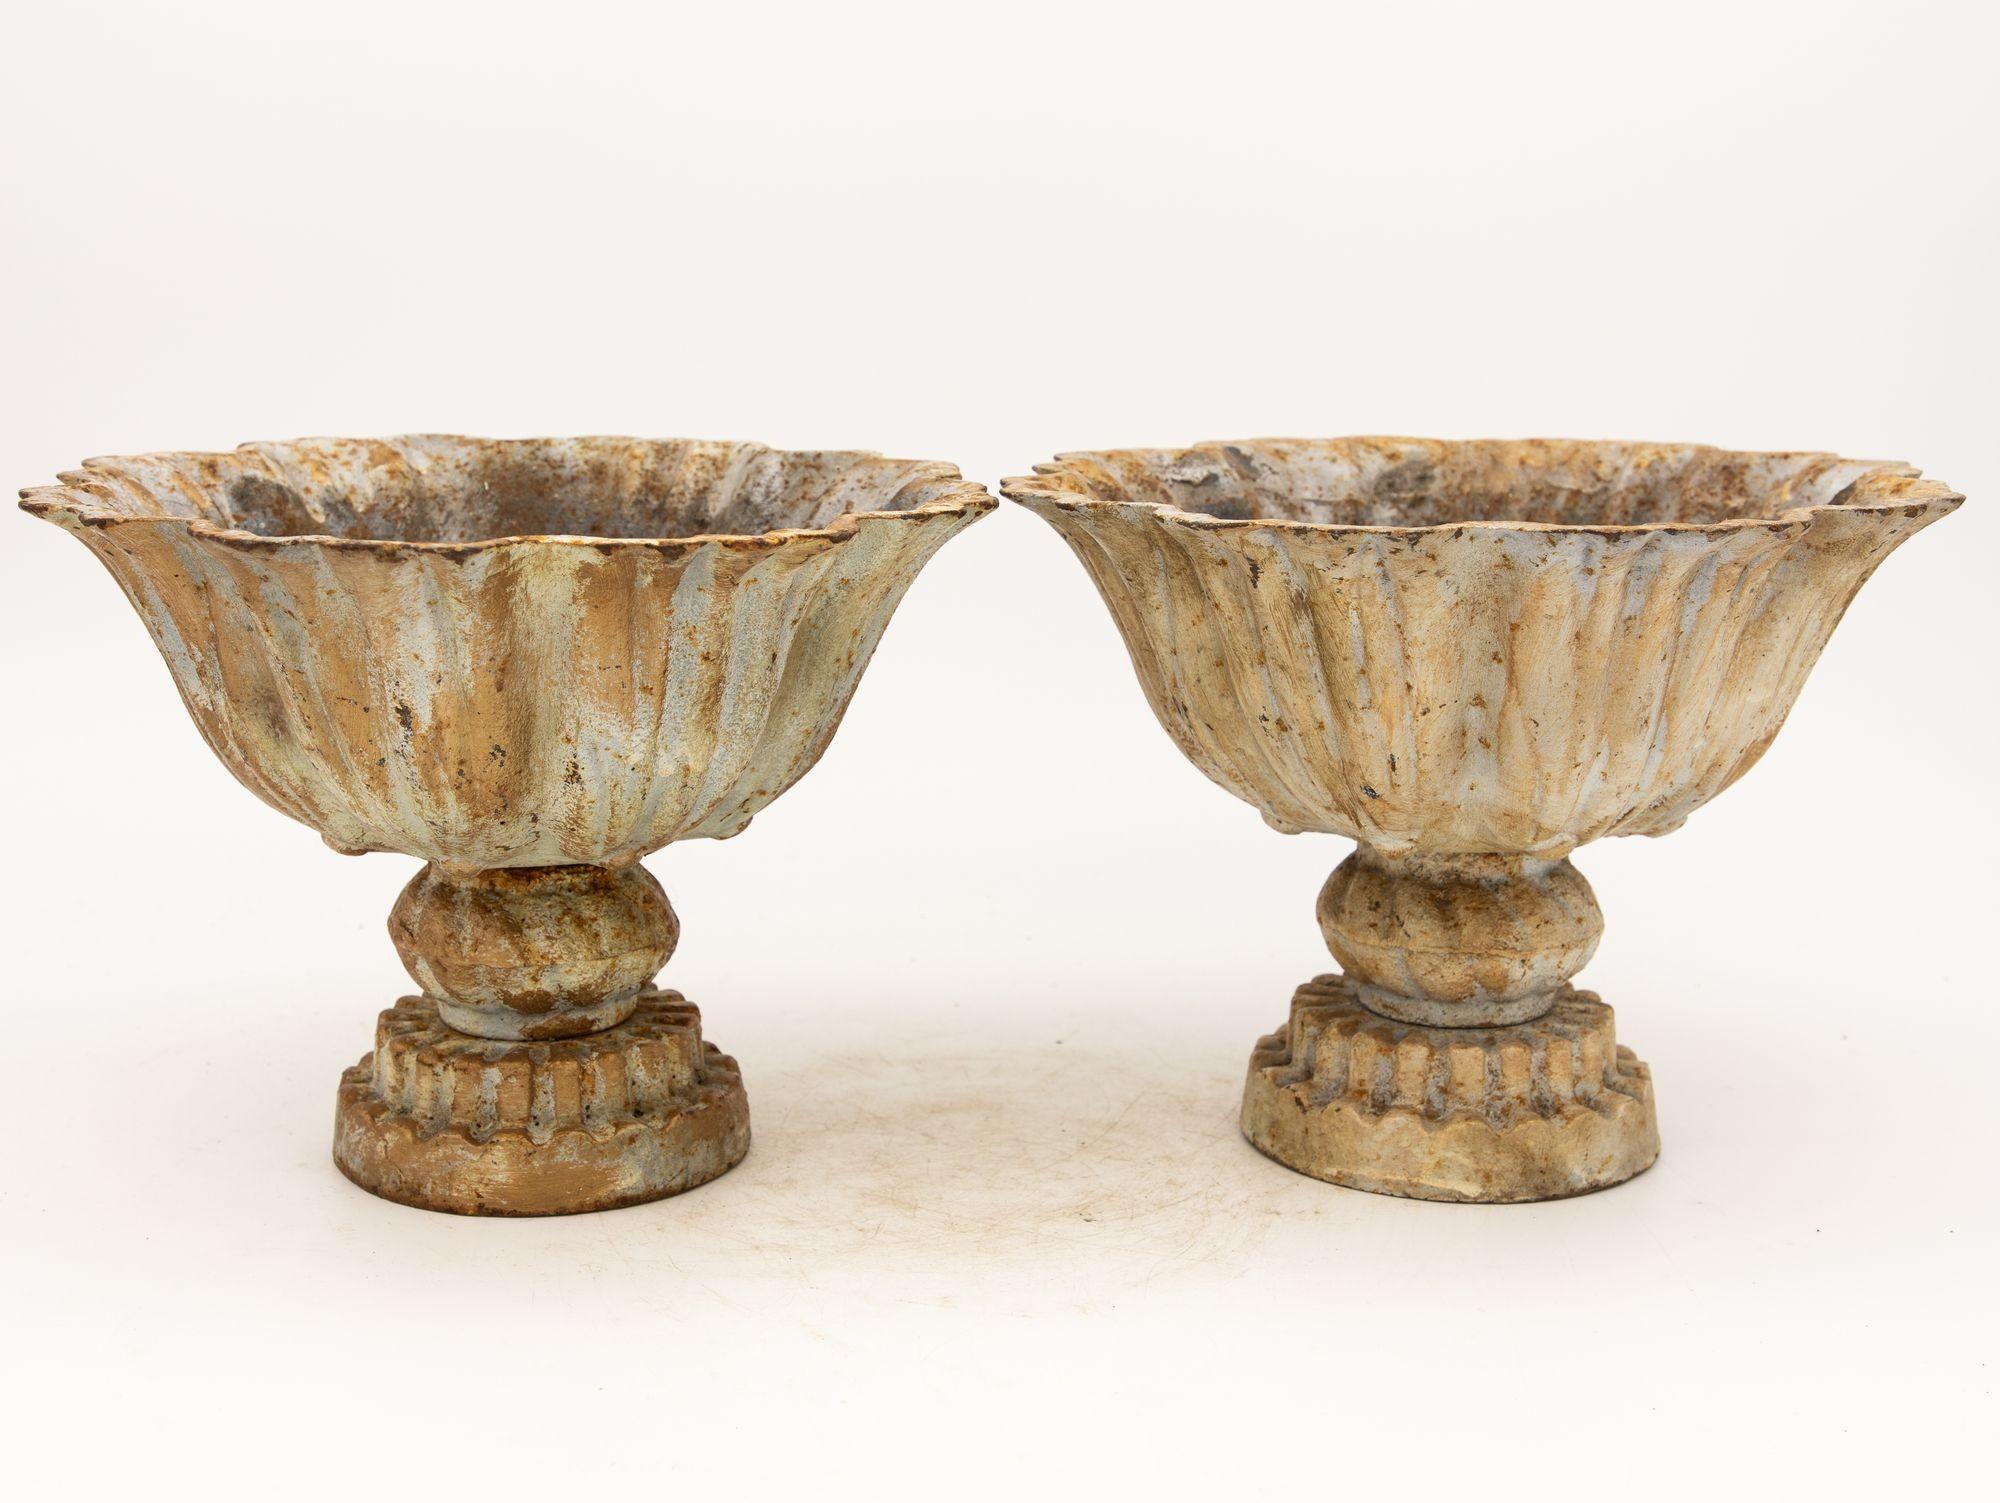 Pair of Verdigris Painted Iron Tazzas or Urns, English, Late 20th Century 1